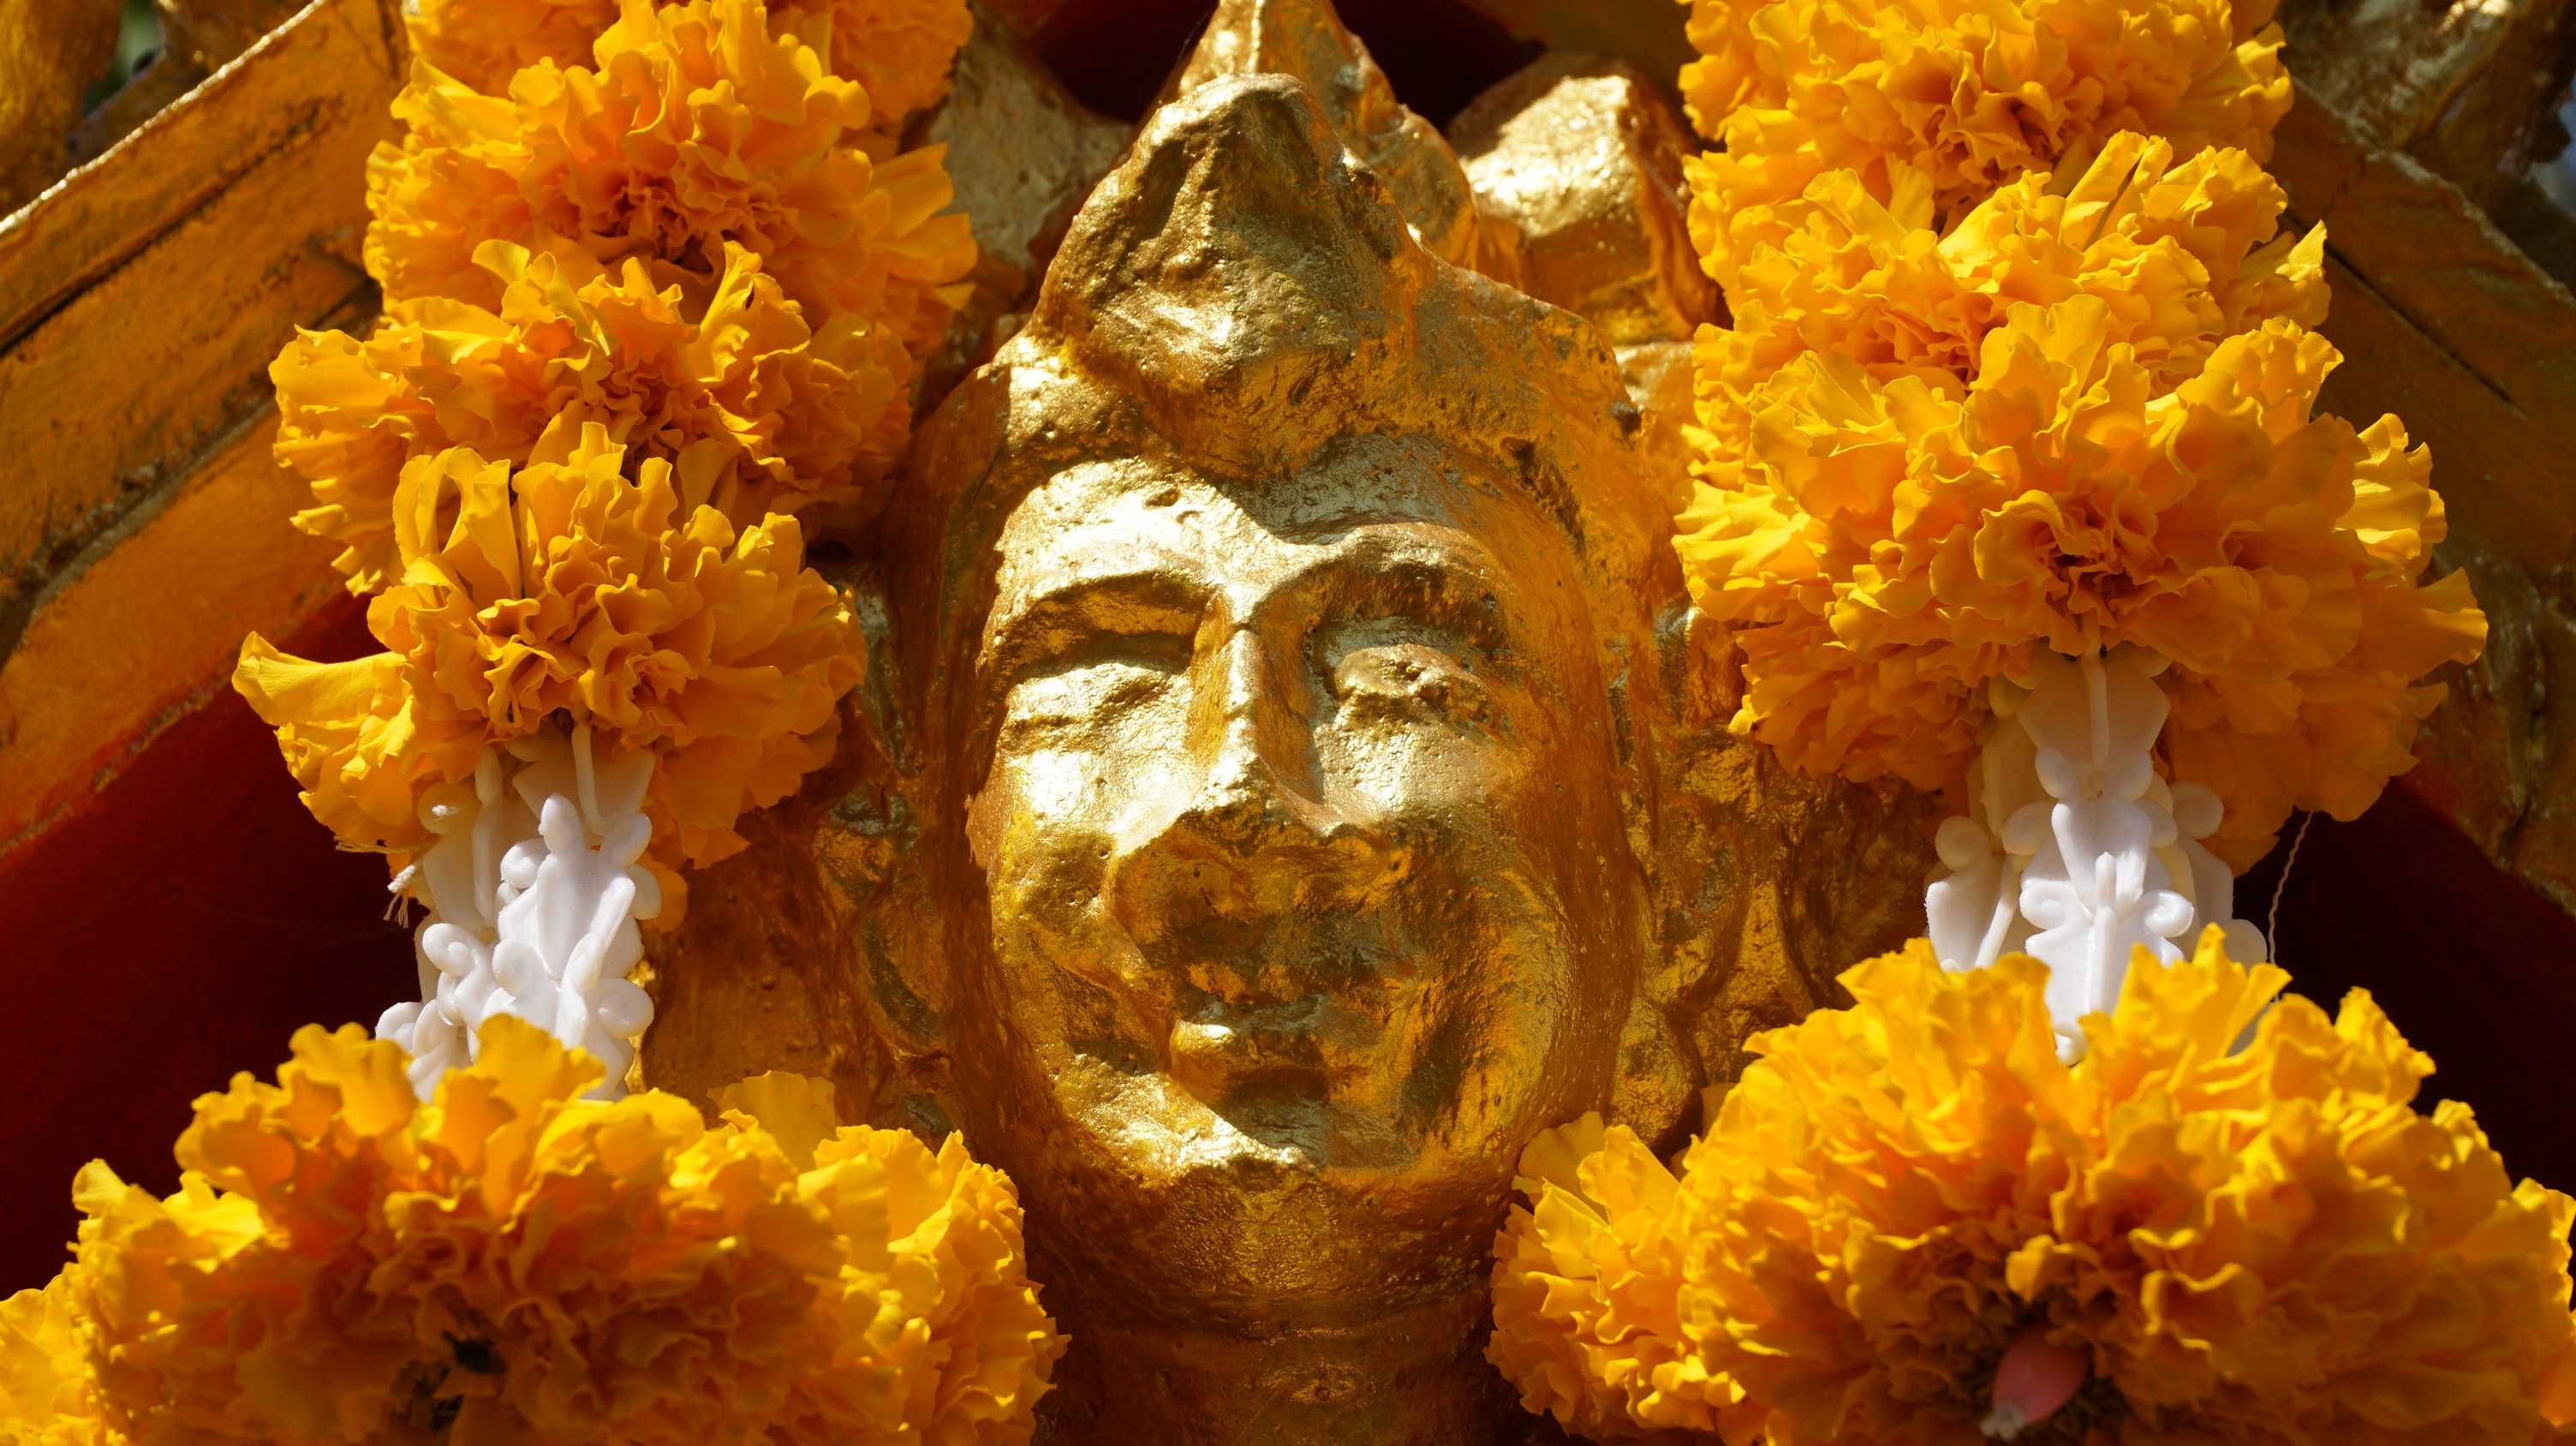 Statue, Adoration, Holy Thing, Image, yellow, gold colored